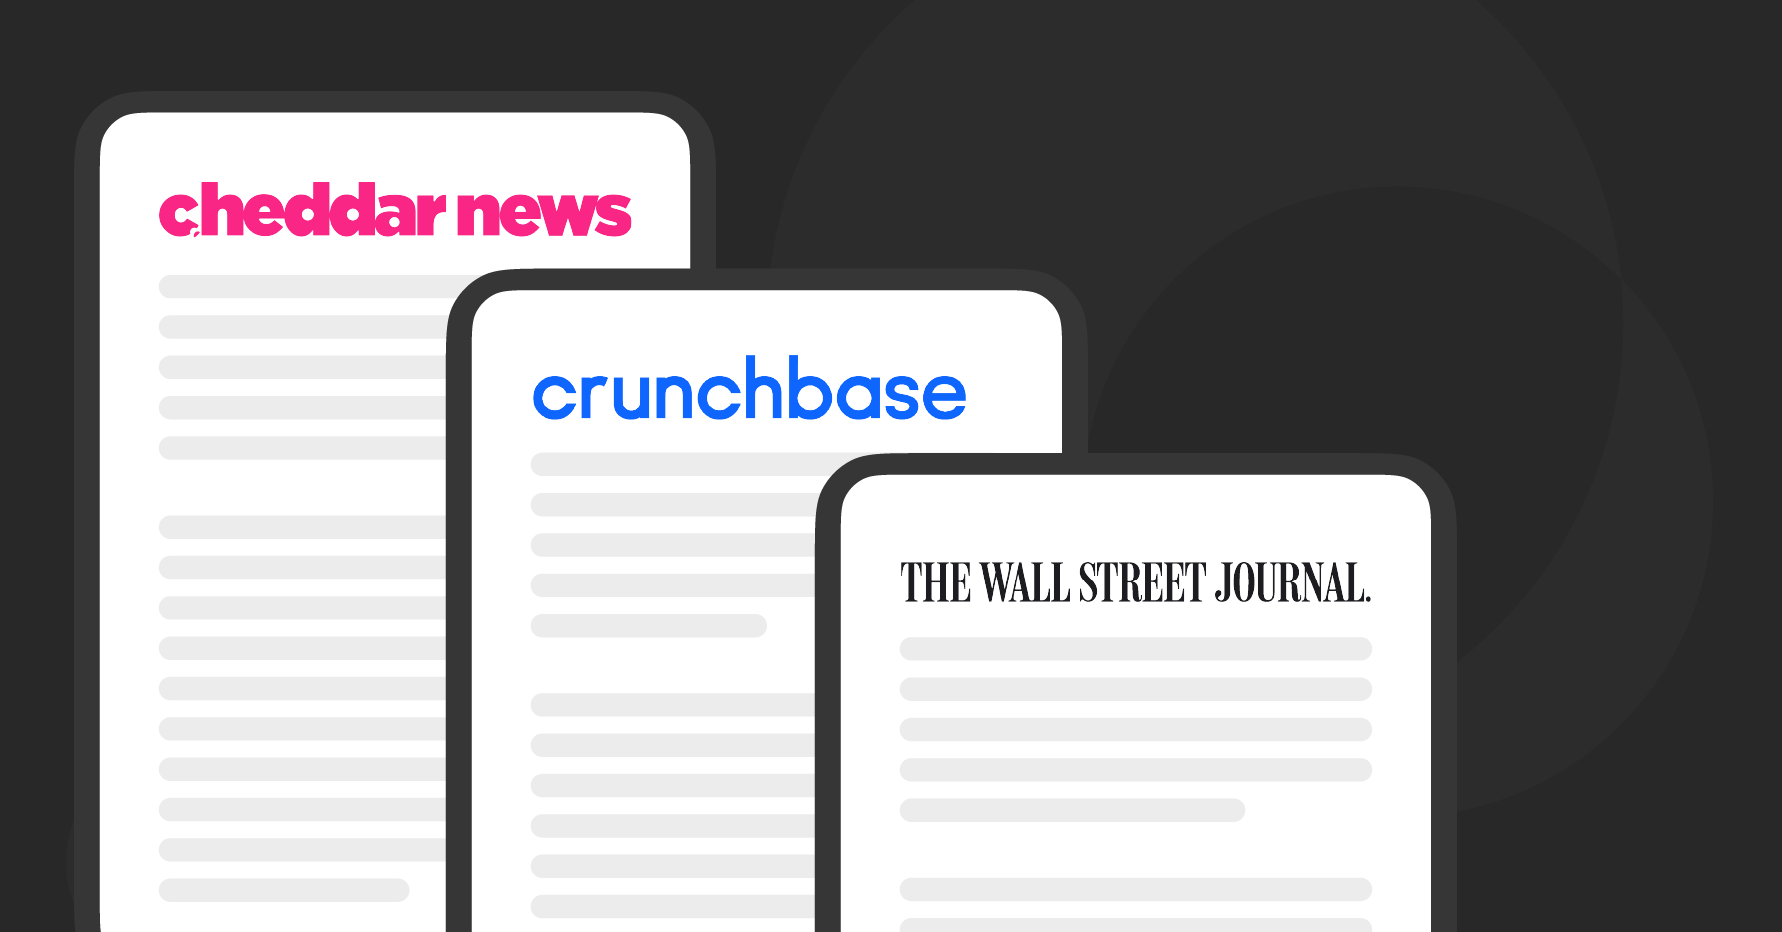 Stylized image of Cheddar News, Crunchbase, and Wall Street Journal articles on three tablet screens